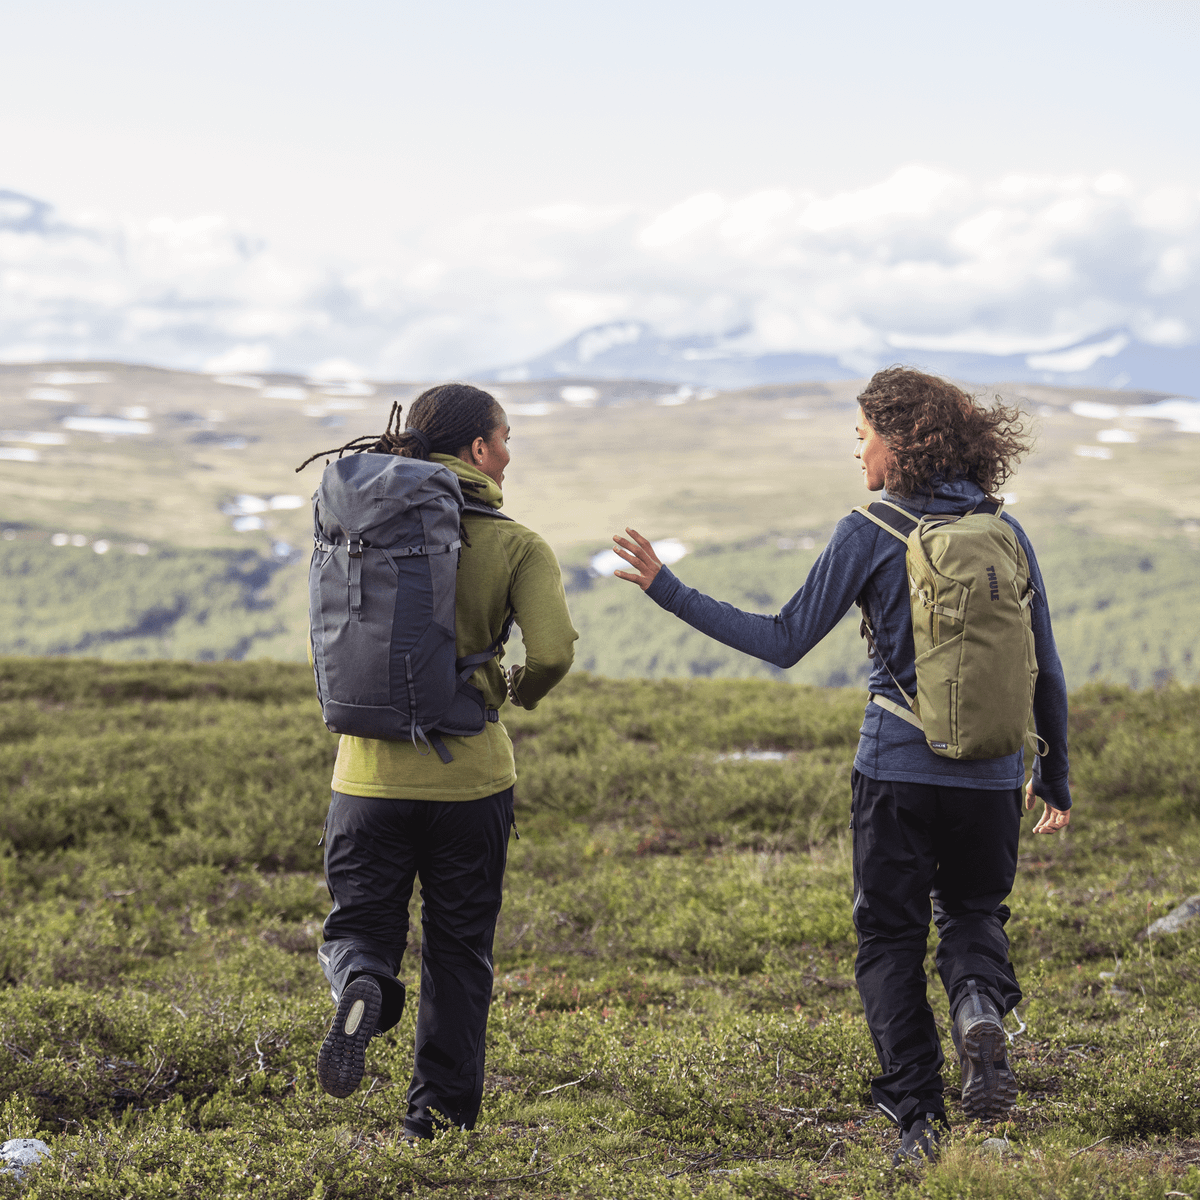 Two people walk through a field carrying green and black Thule AllTrail X hiking backpacks.